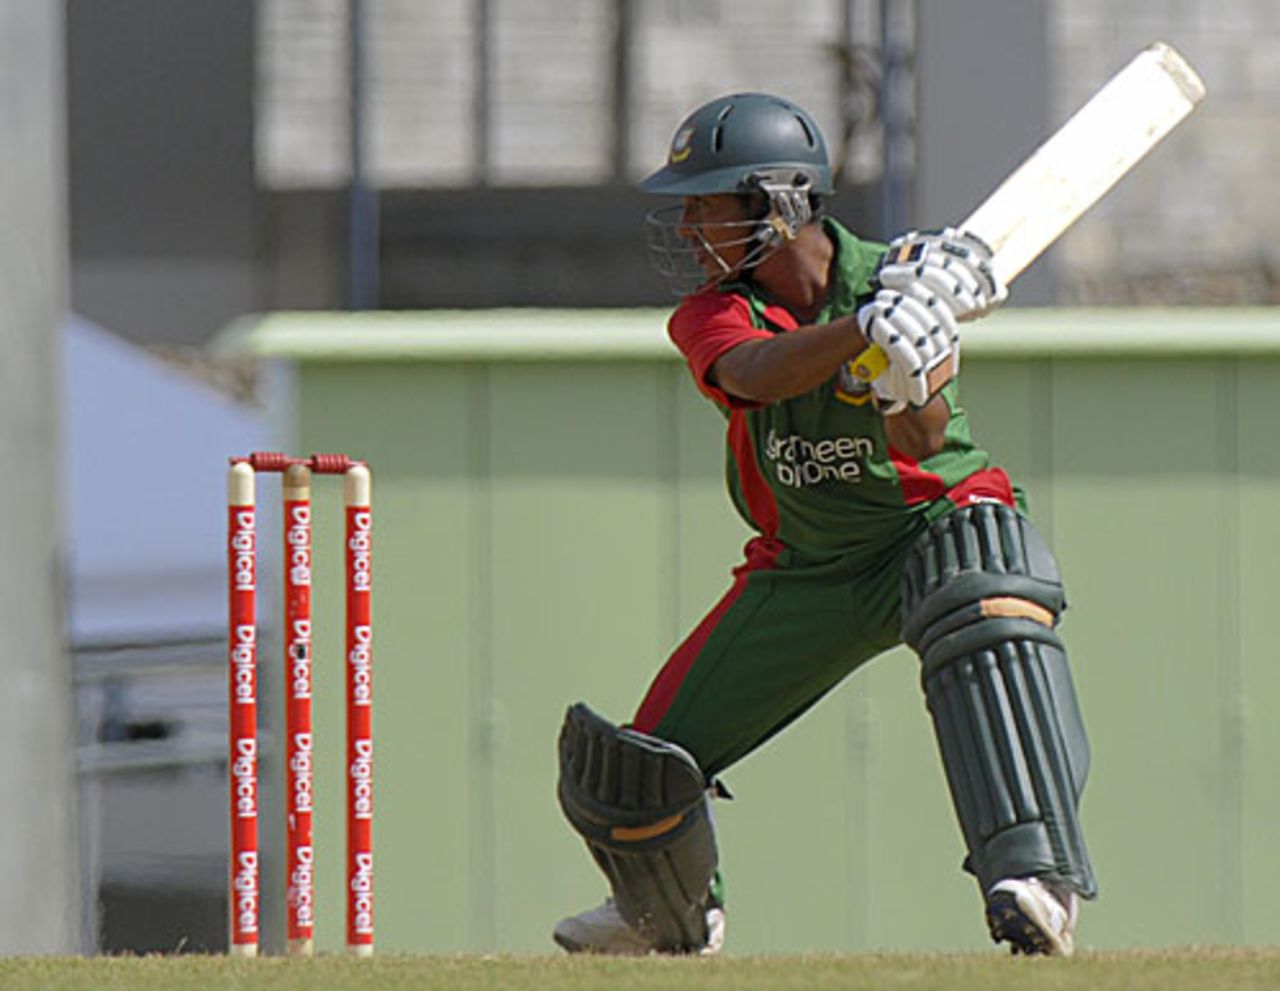 Mohammad Ashraful cuts during his fifty, West Indies v Bangladesh, 2nd ODI, Dominica, July 28, 2009 